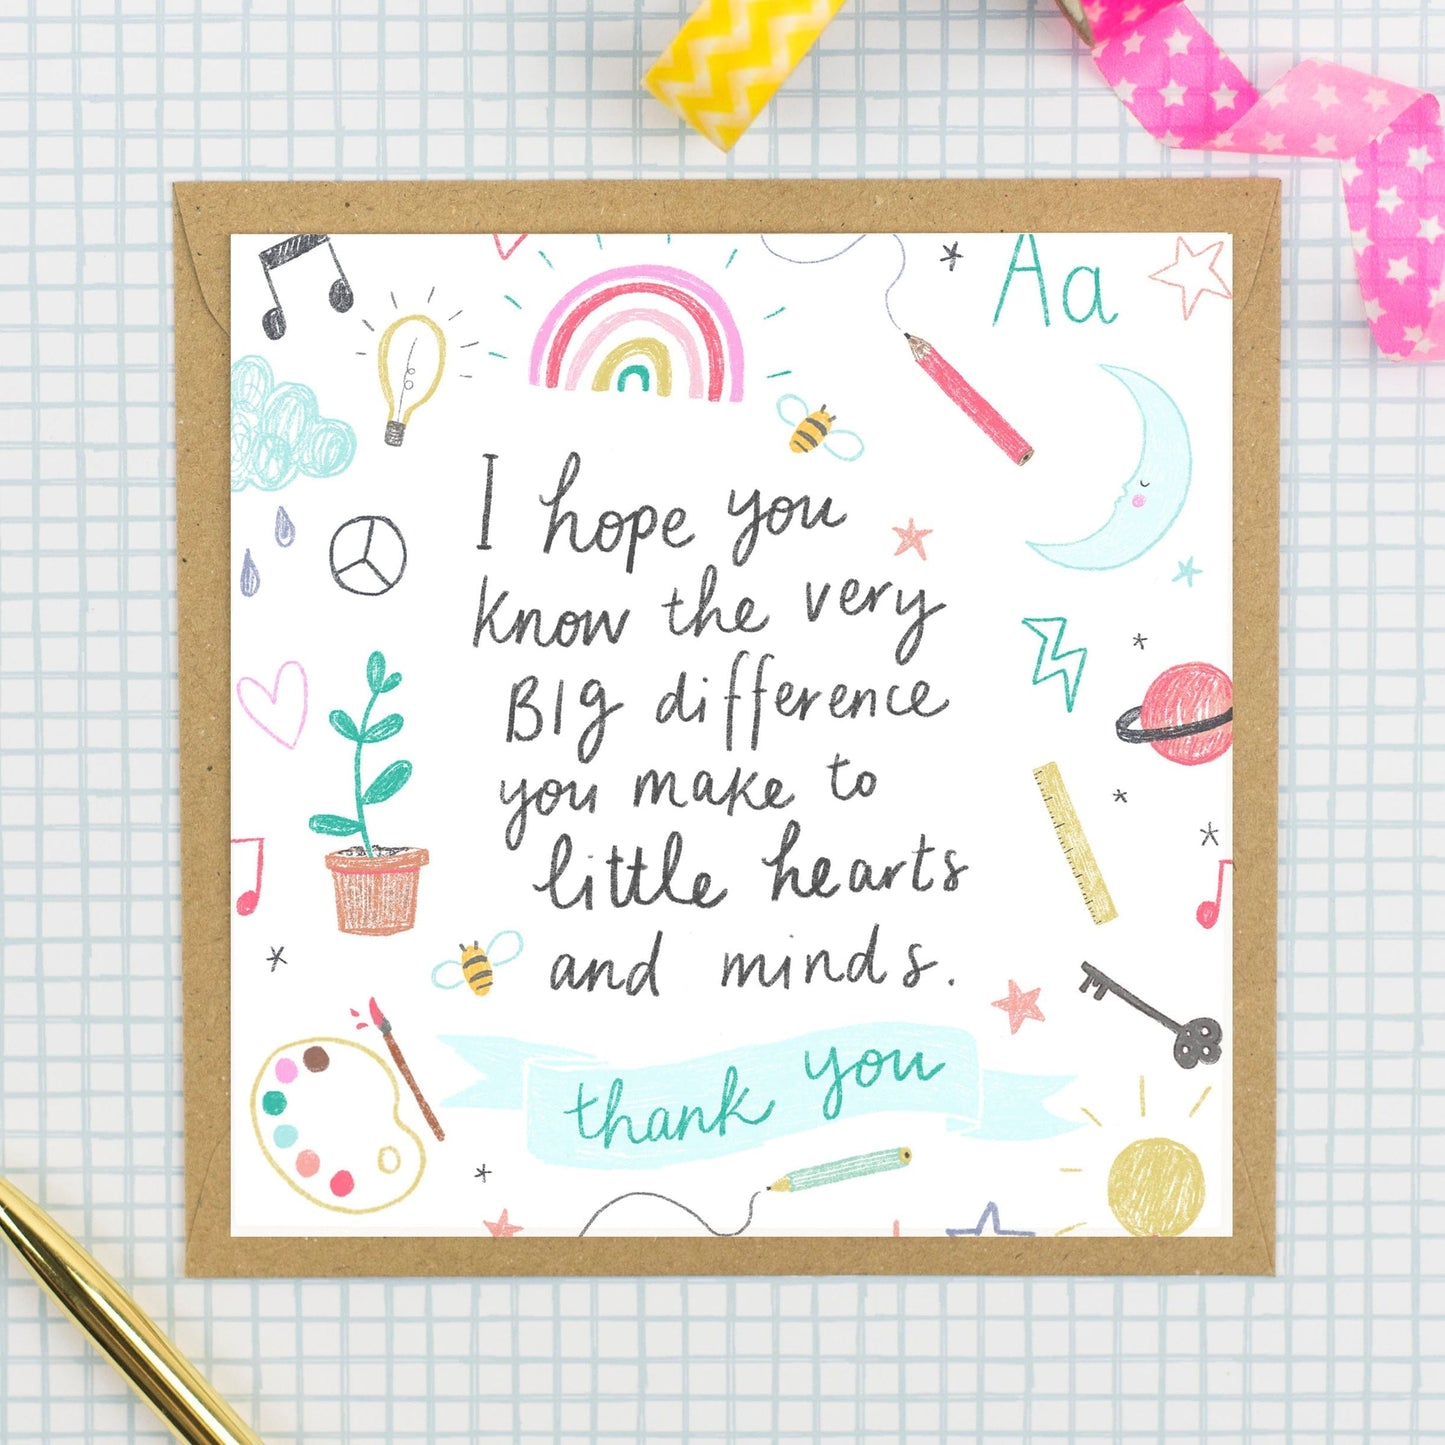 Pickled Pom Pom Cards You make a big difference to my little person - Picked Pom Pom Cards